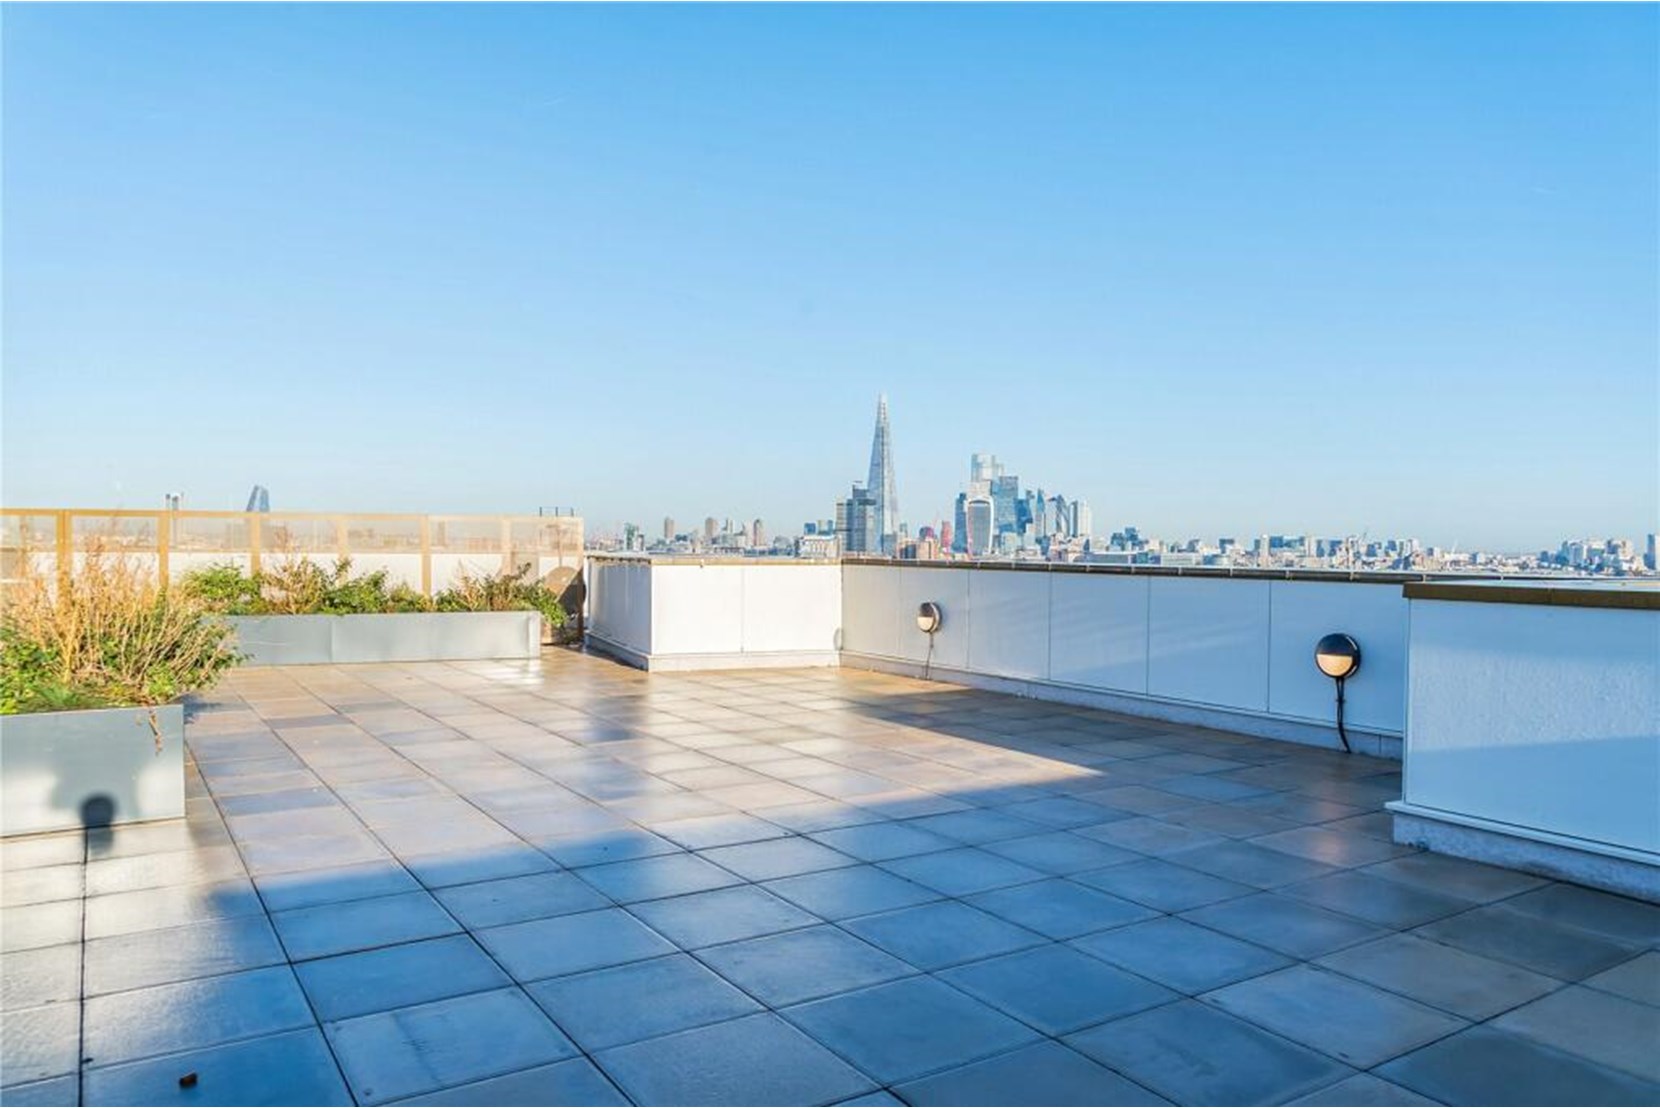 Apartments to Rent by Folio at Marson Place, Southwark, SE17, roof terrace